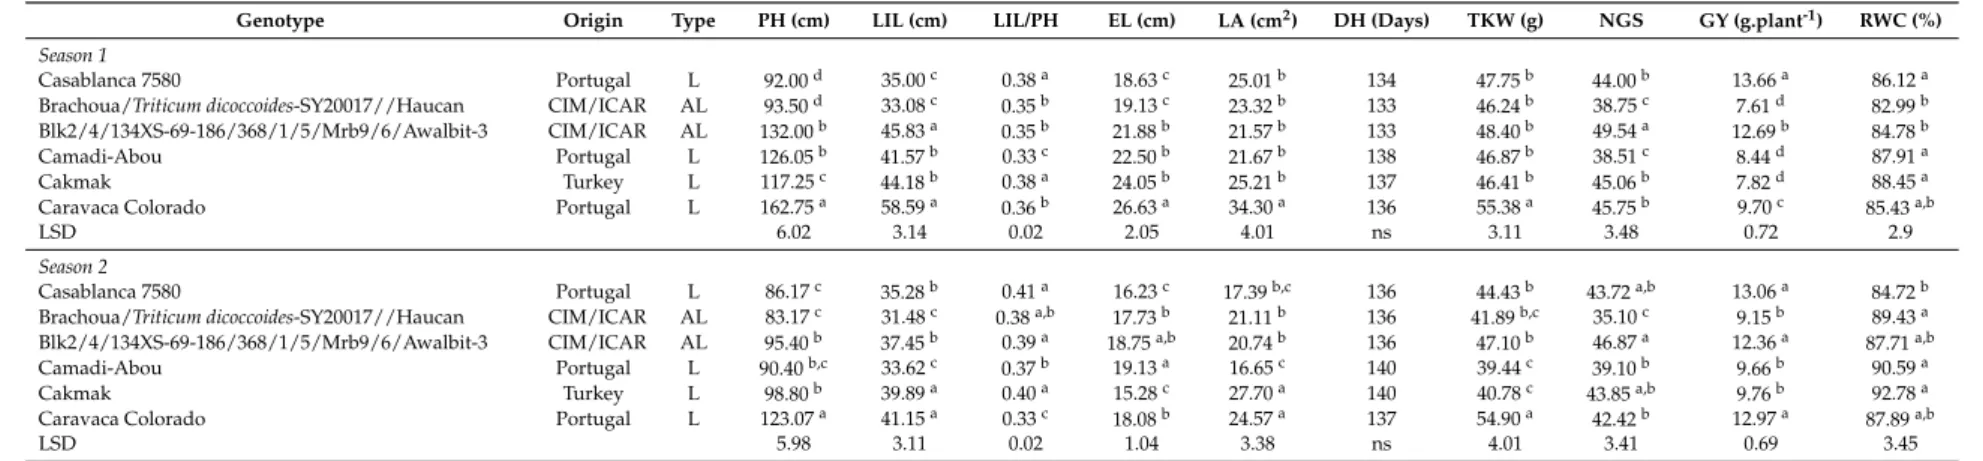 Table 1. The main morphological, physiological, agronomic characteristics and precocity of the six genotypes studied (LSD: least significant difference).